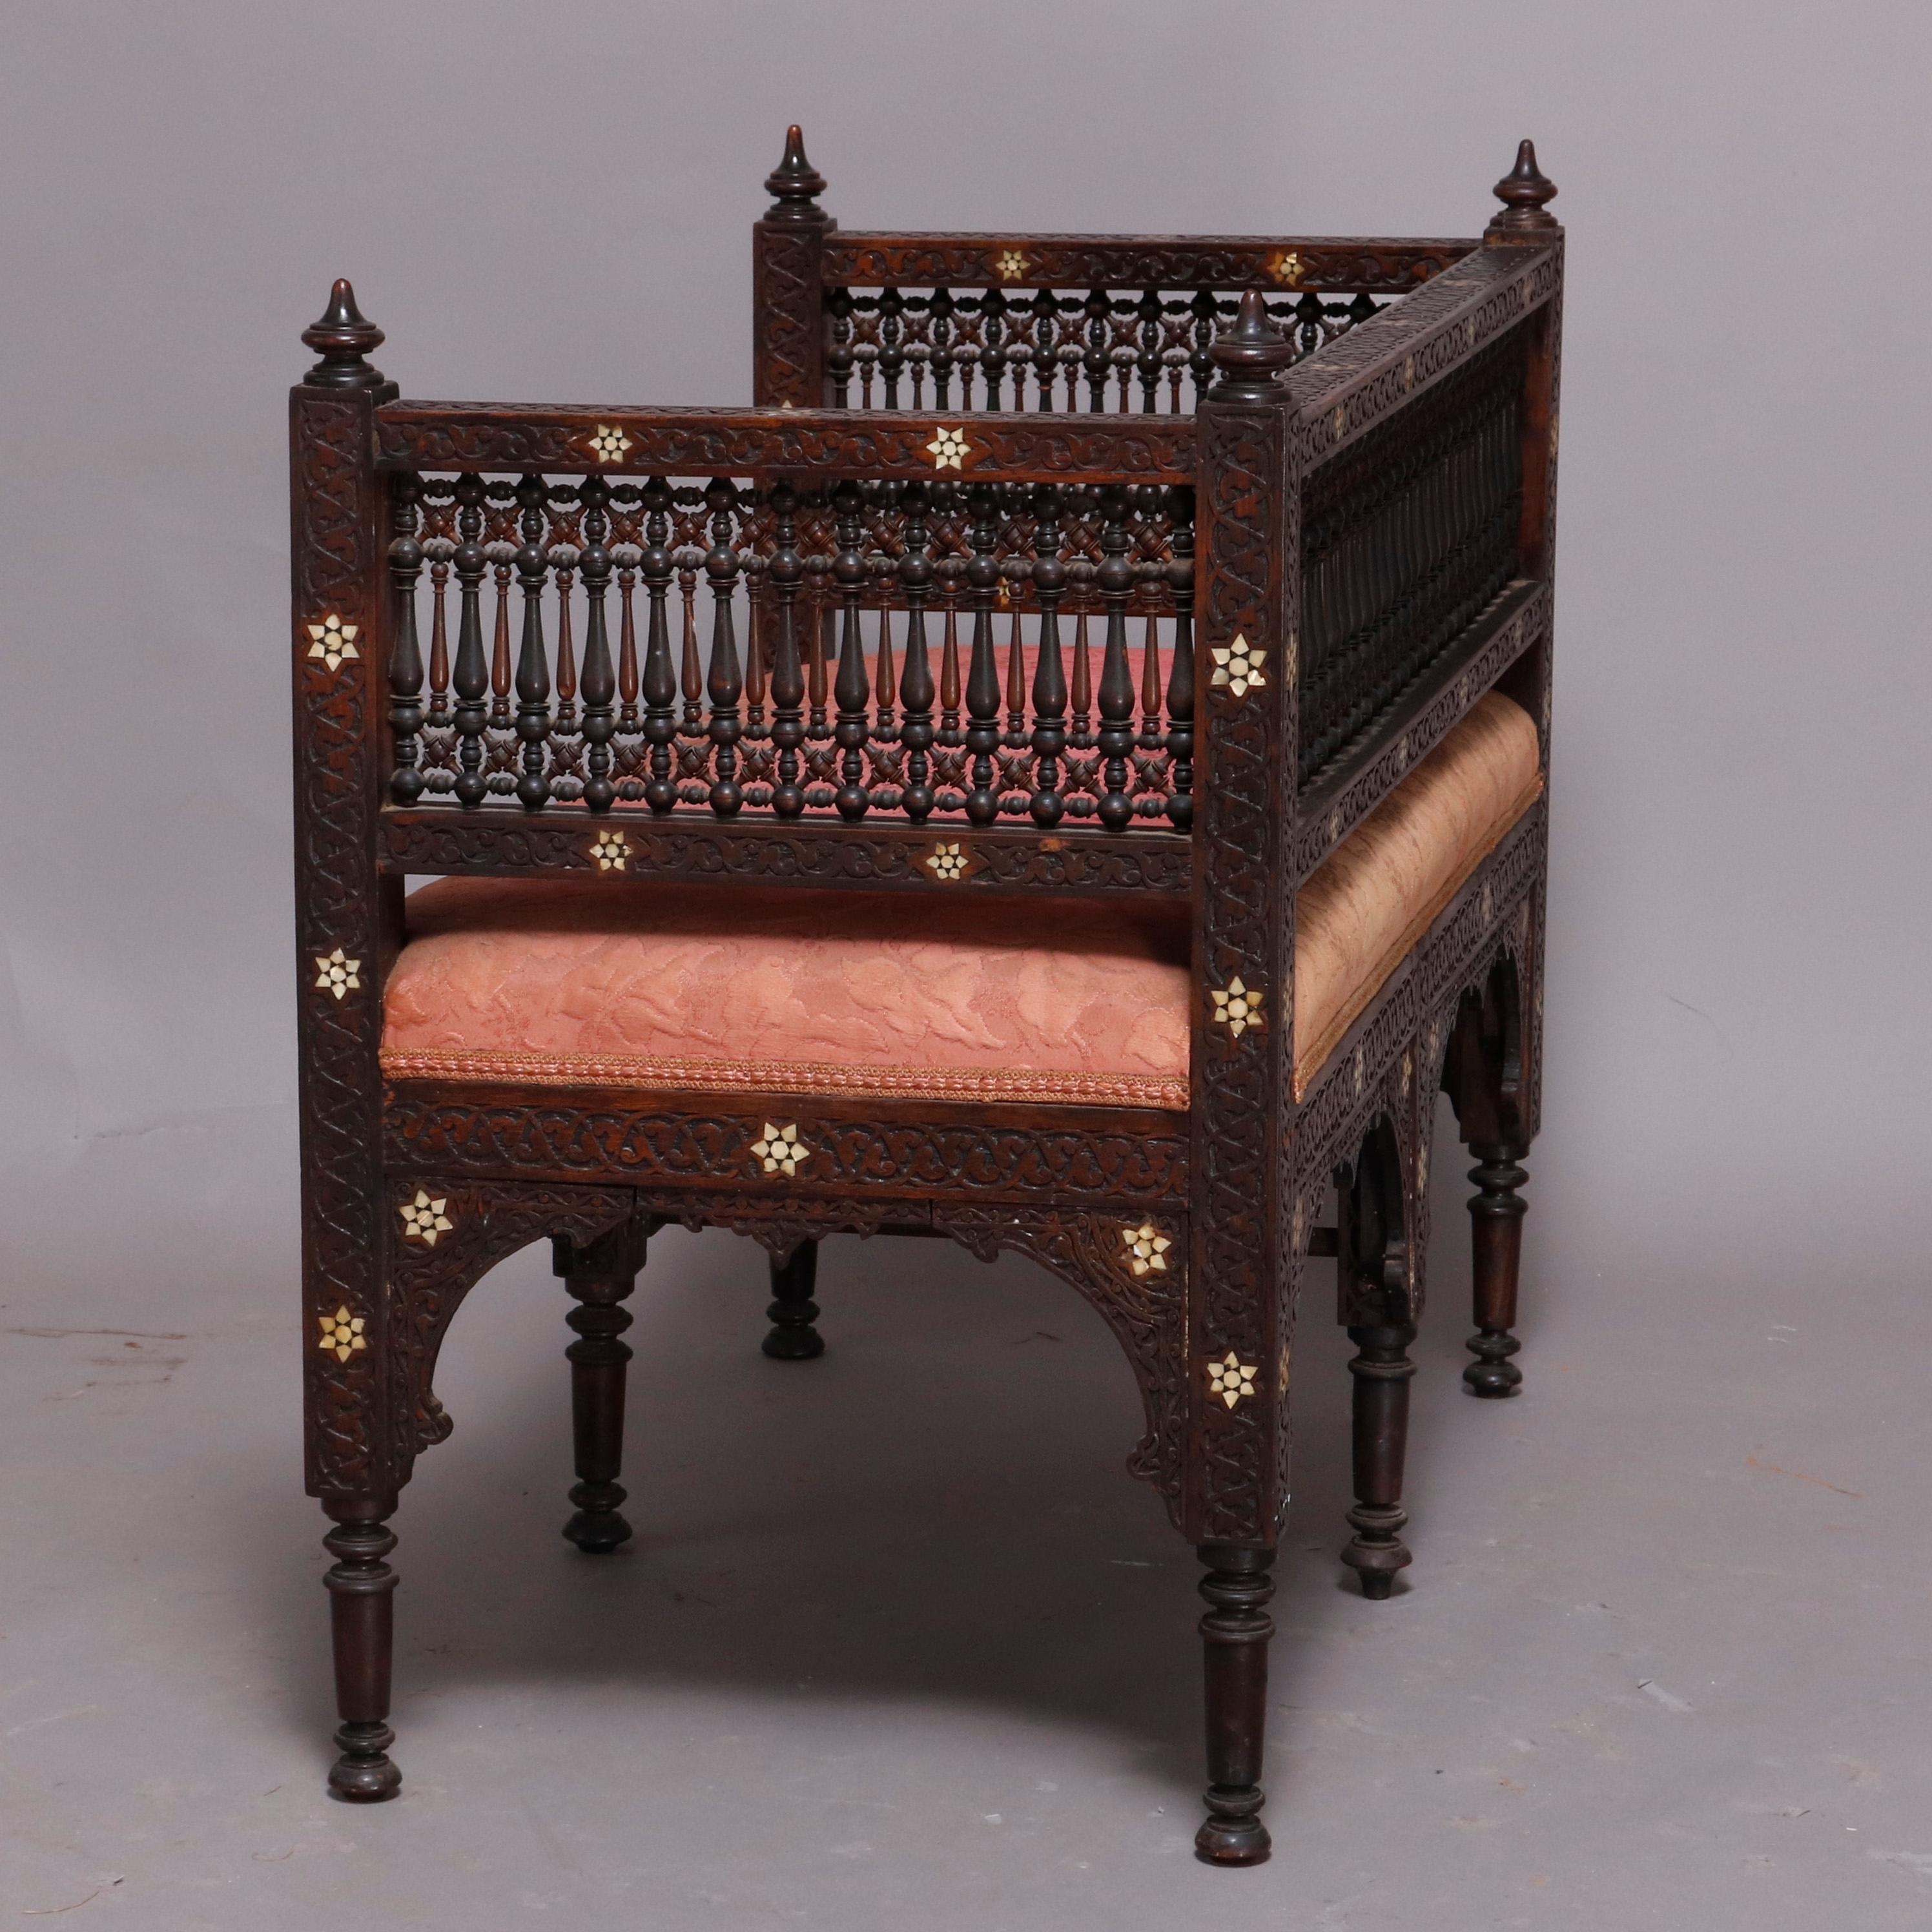 Syrian Orientalist Mother of Pearl Inlaid & Carved Hardwood Settee 19th Century 9